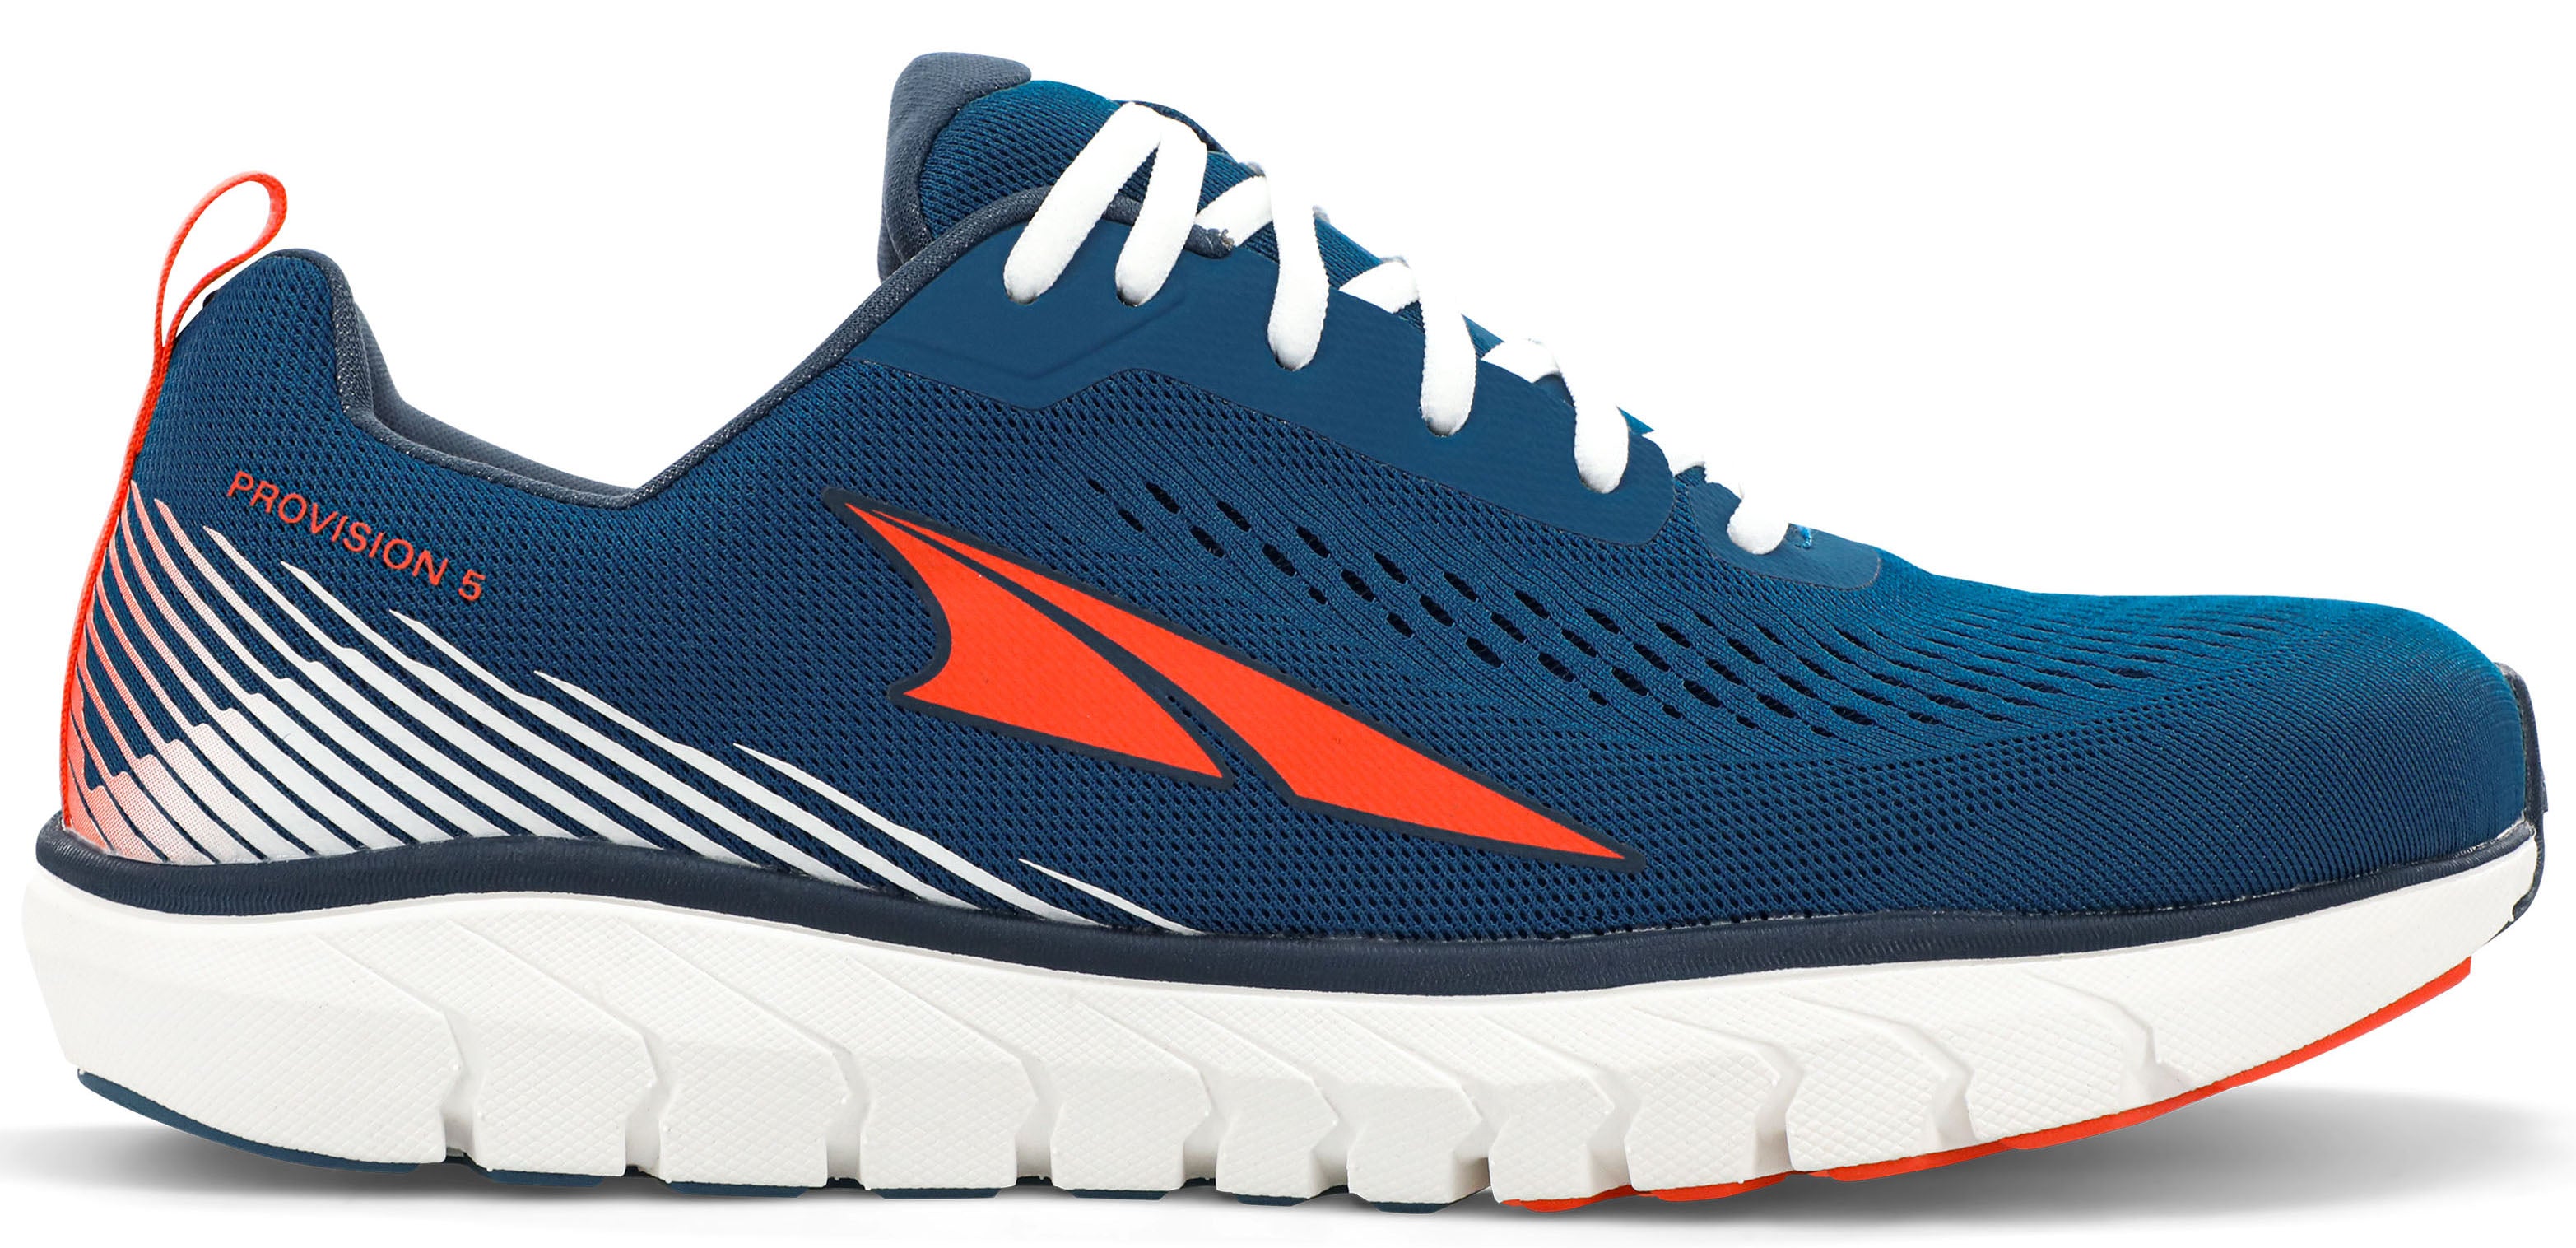 Men's Altra Provision 5 Road Running Shoe in Blue/Orange from the side